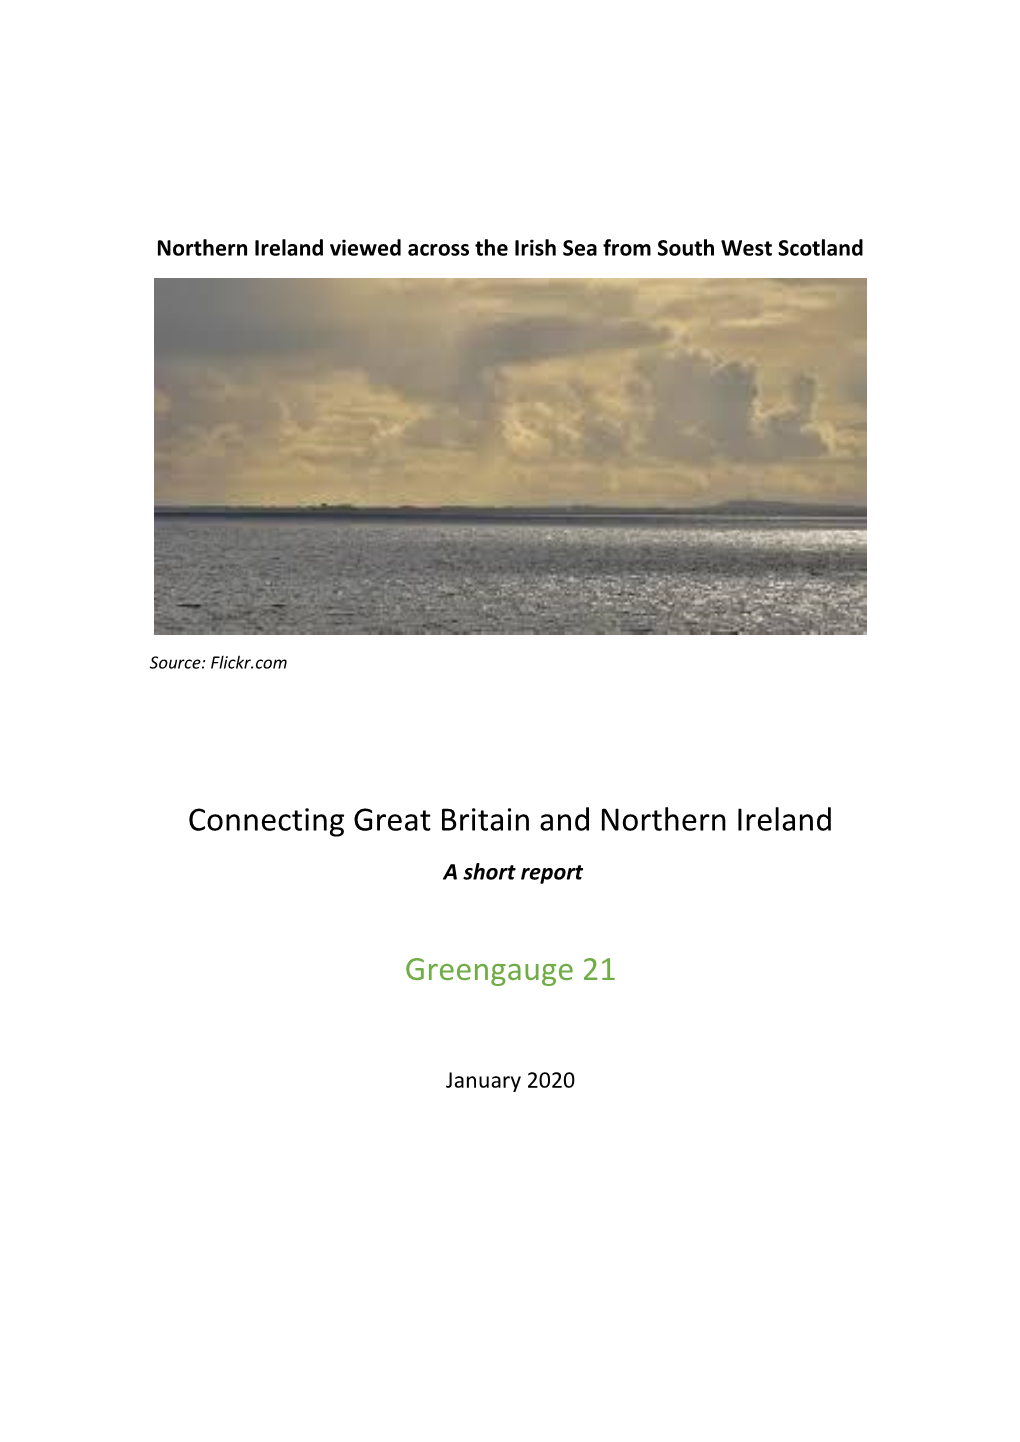 Connecting Great Britain and Northern Ireland Greengauge 21